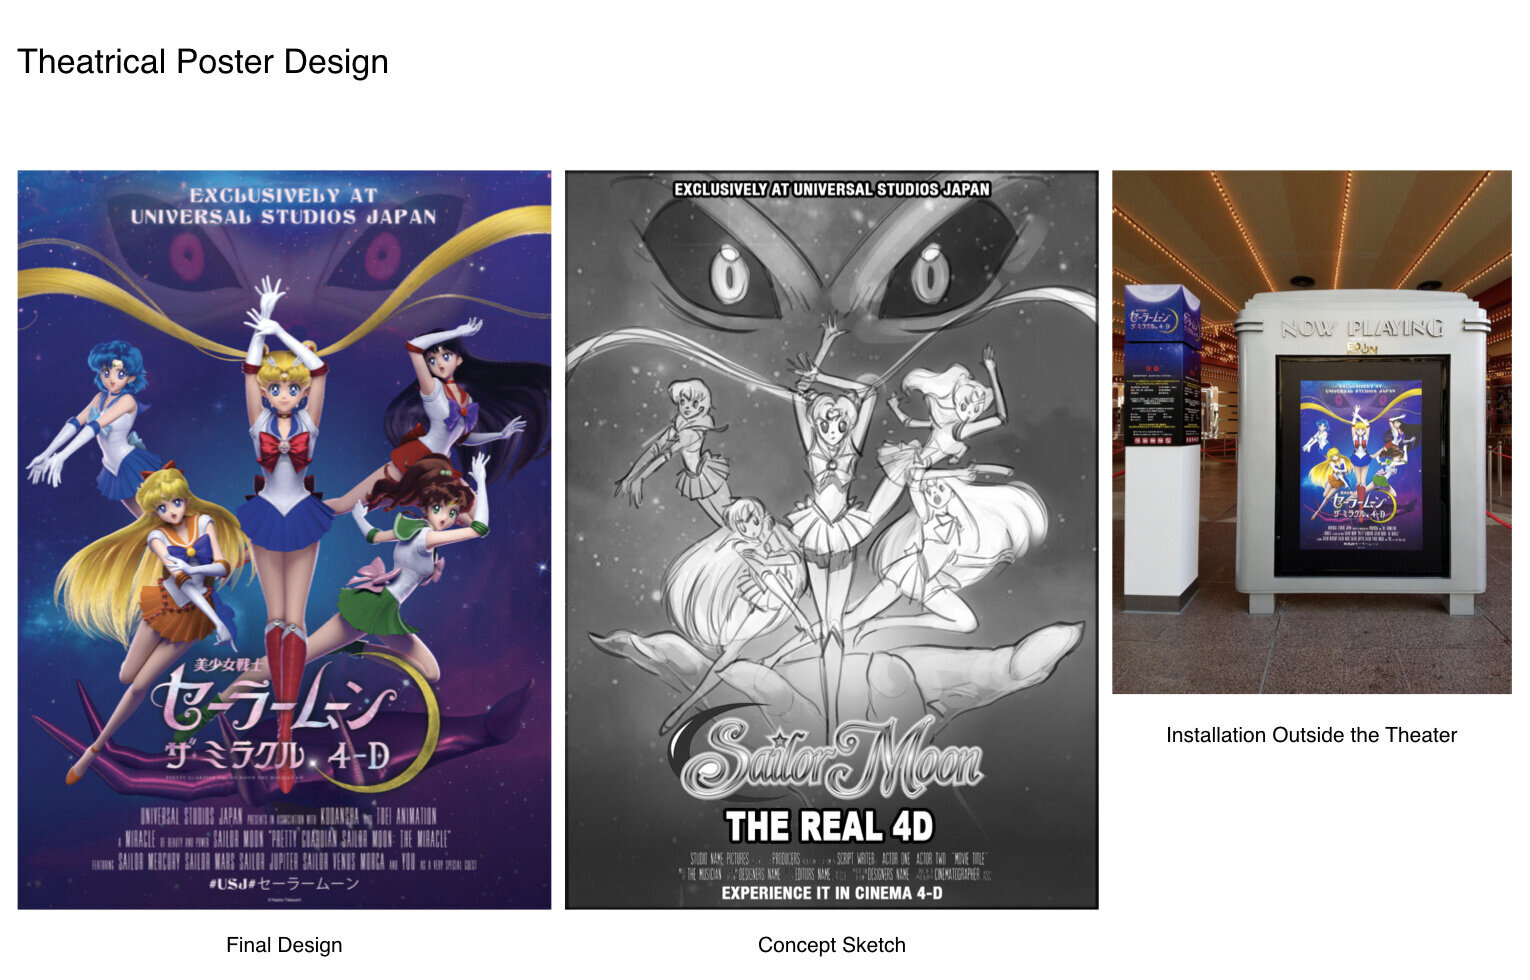  Concept sketch, art direction, and final design for theatrical poster advertising the attraction  3D character assets provided by  Toei Animation  